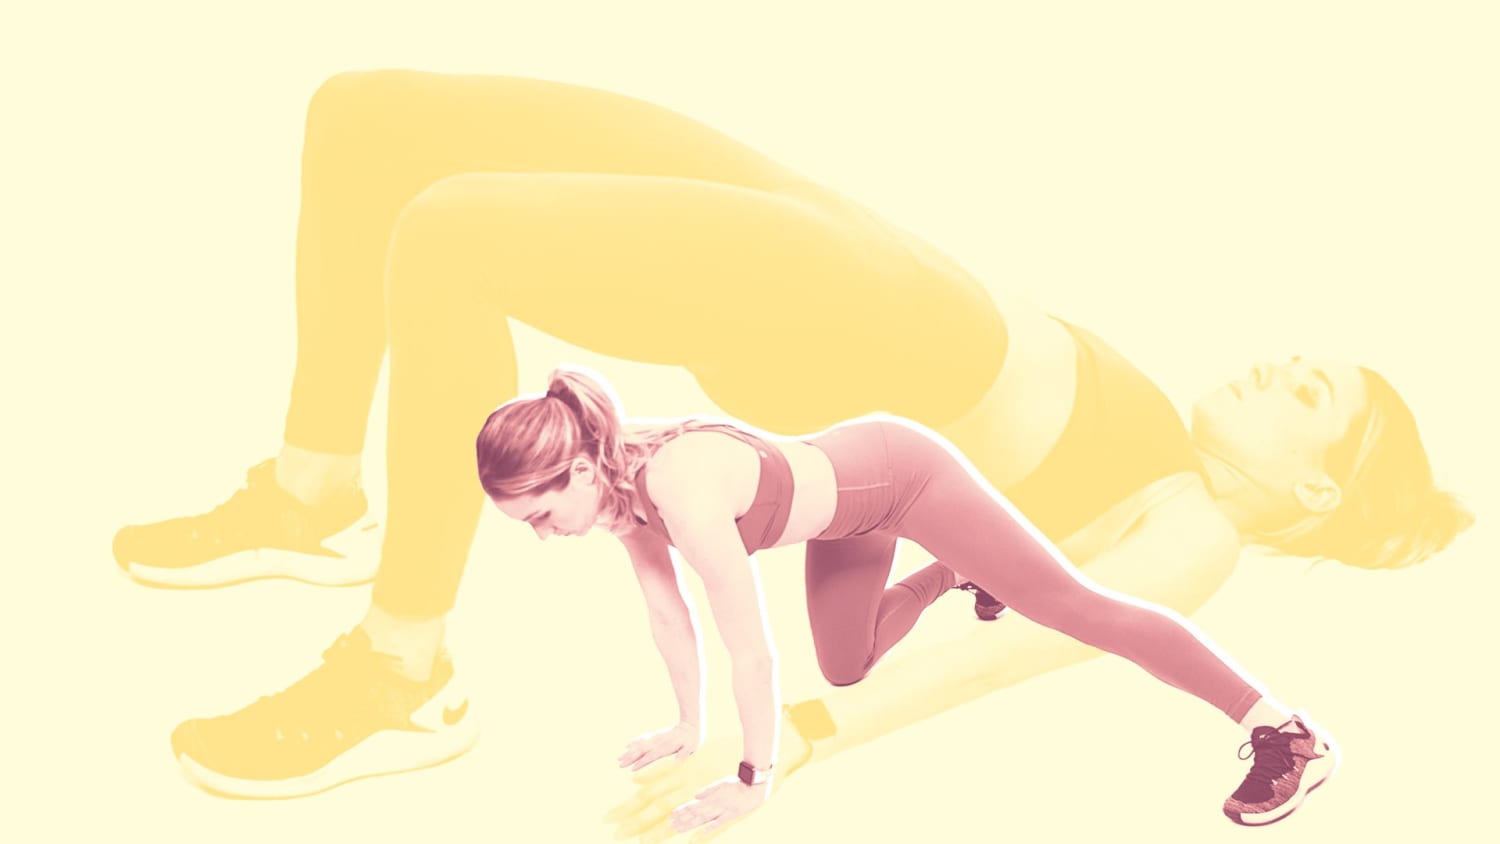 15 Stretches for the Hips For When They Feel Super Tight